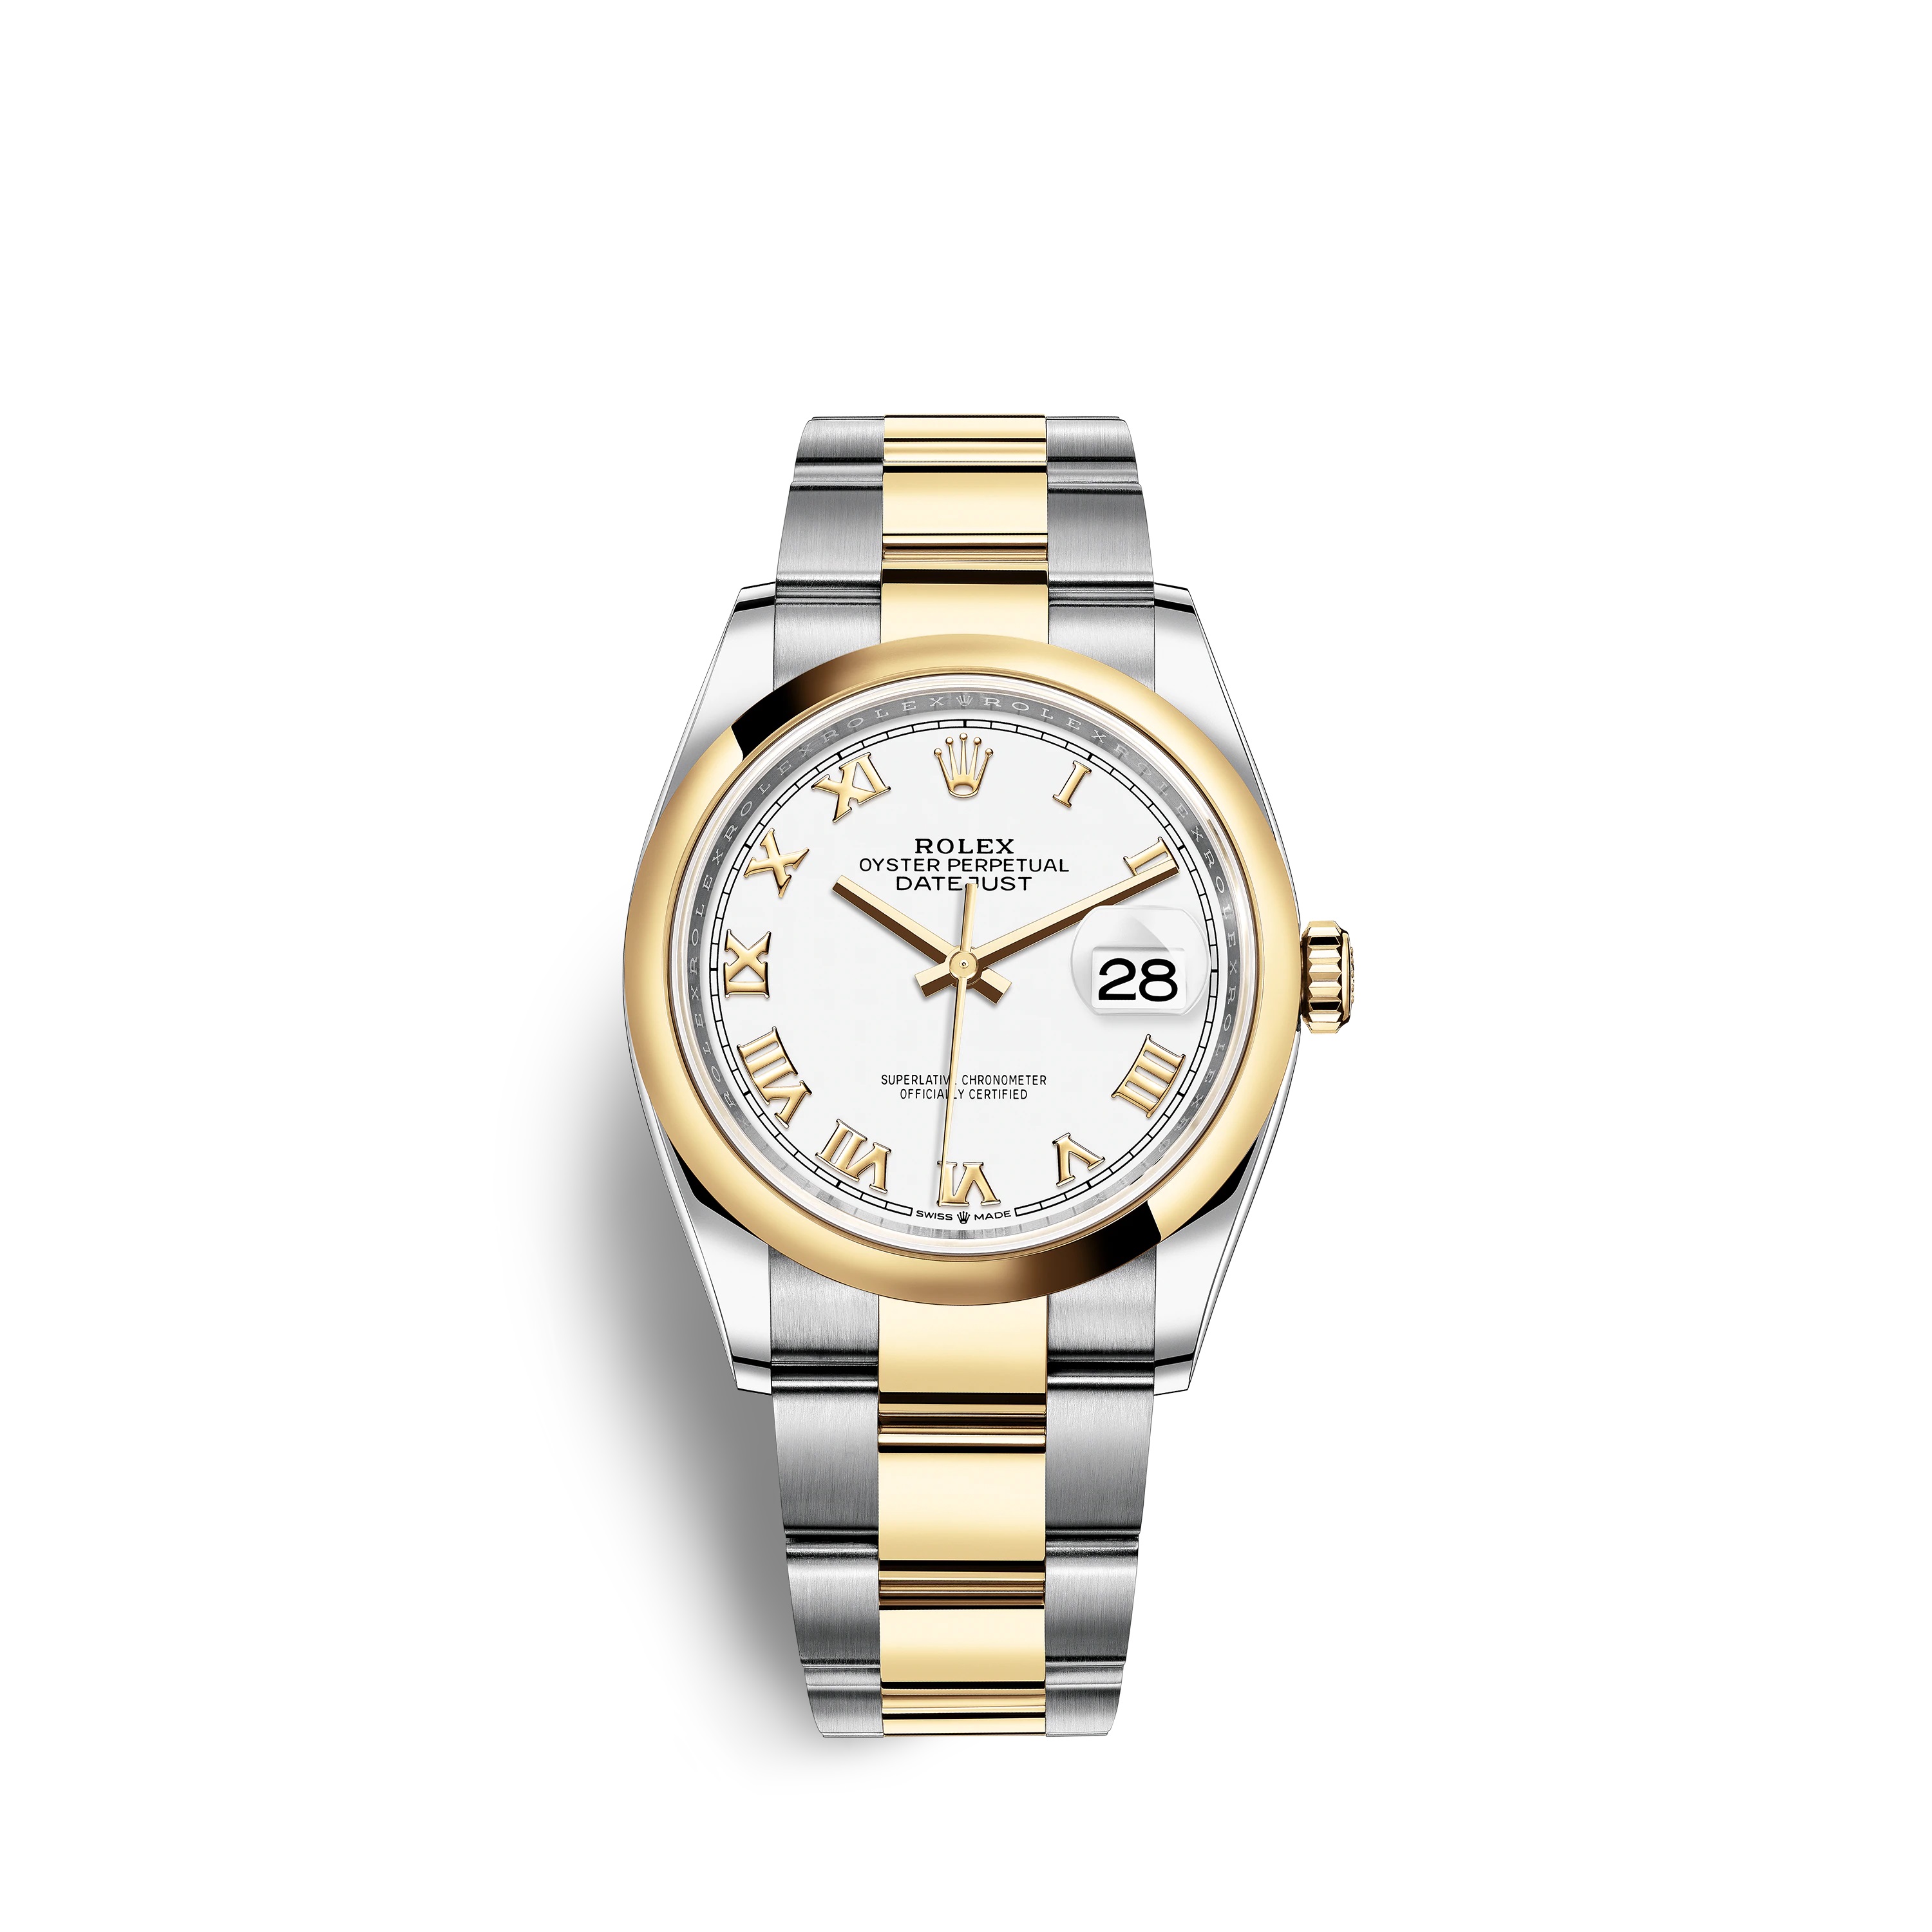 Datejust 36 126203 Gold & Stainless Steel Watch (White)